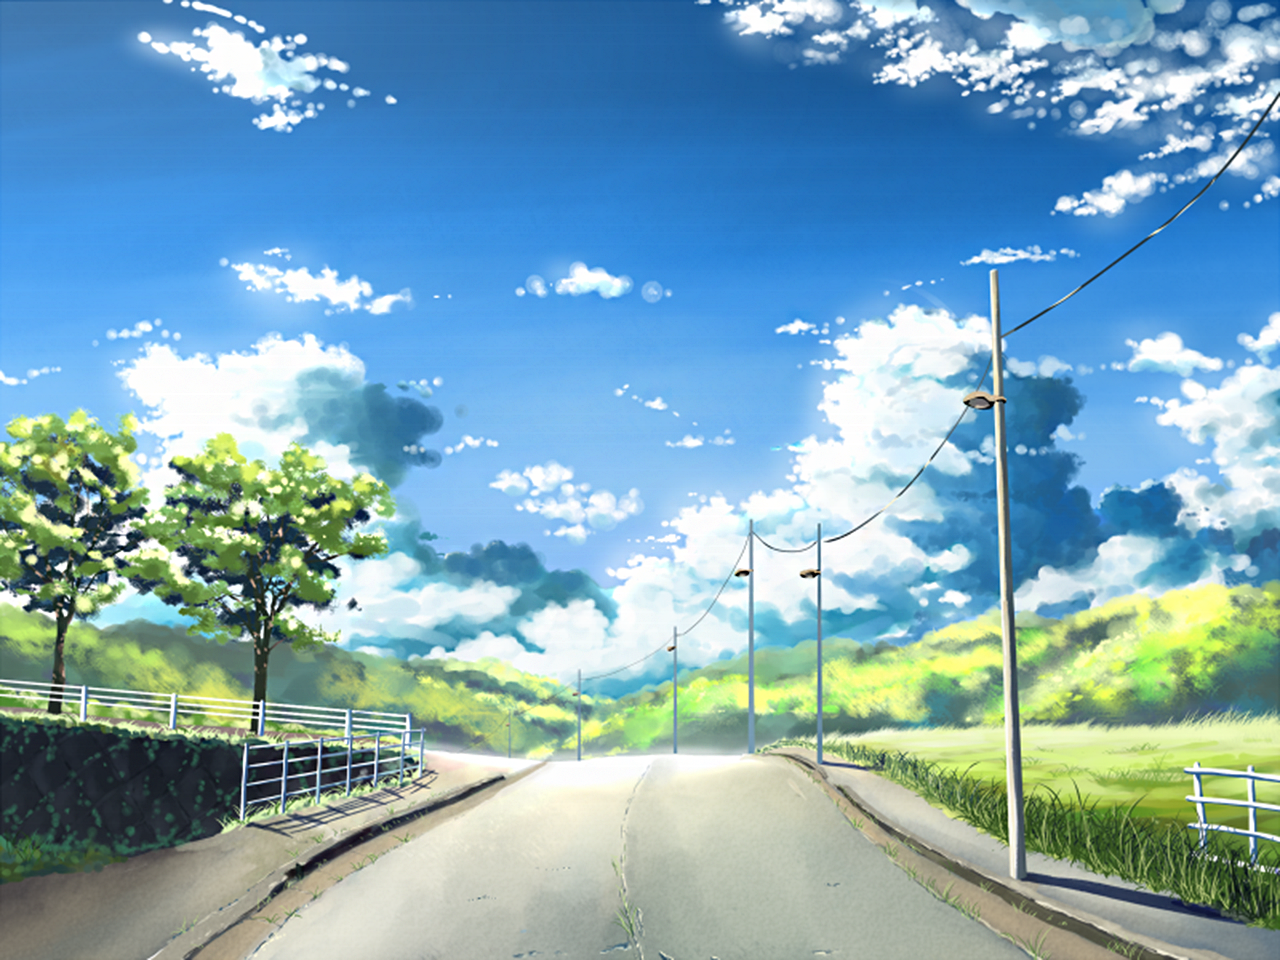 Anime Road Wallpapers - Wallpaper Cave